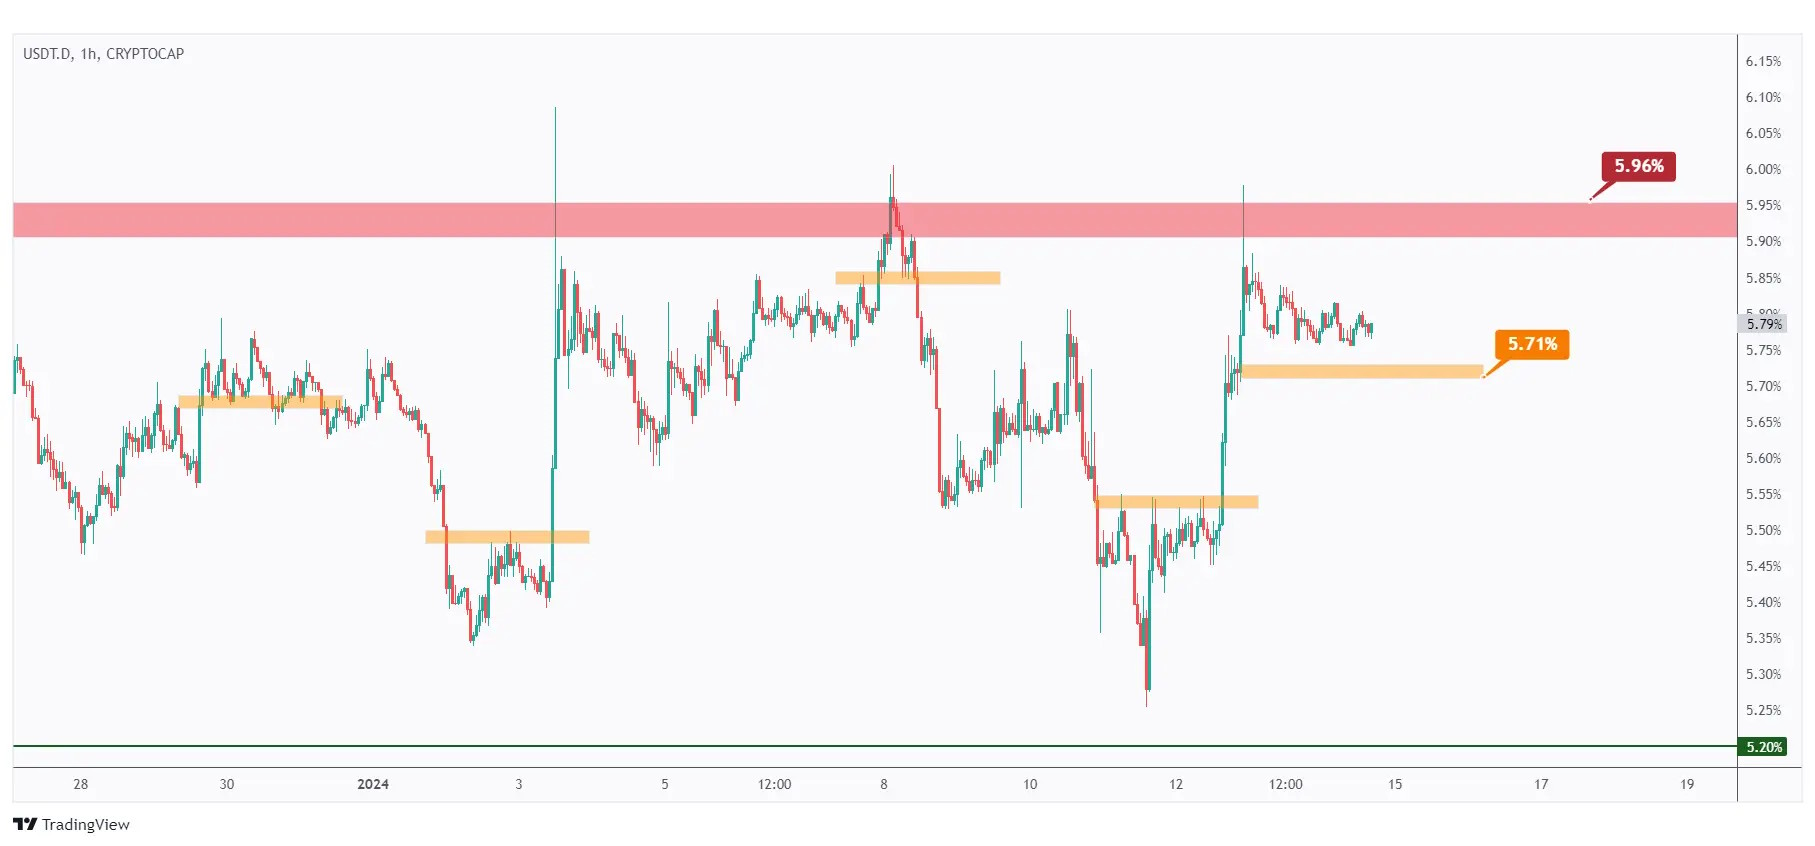 USDT dominance 1h chart showing the bulls are in control unless the 5.71% is broken downward.